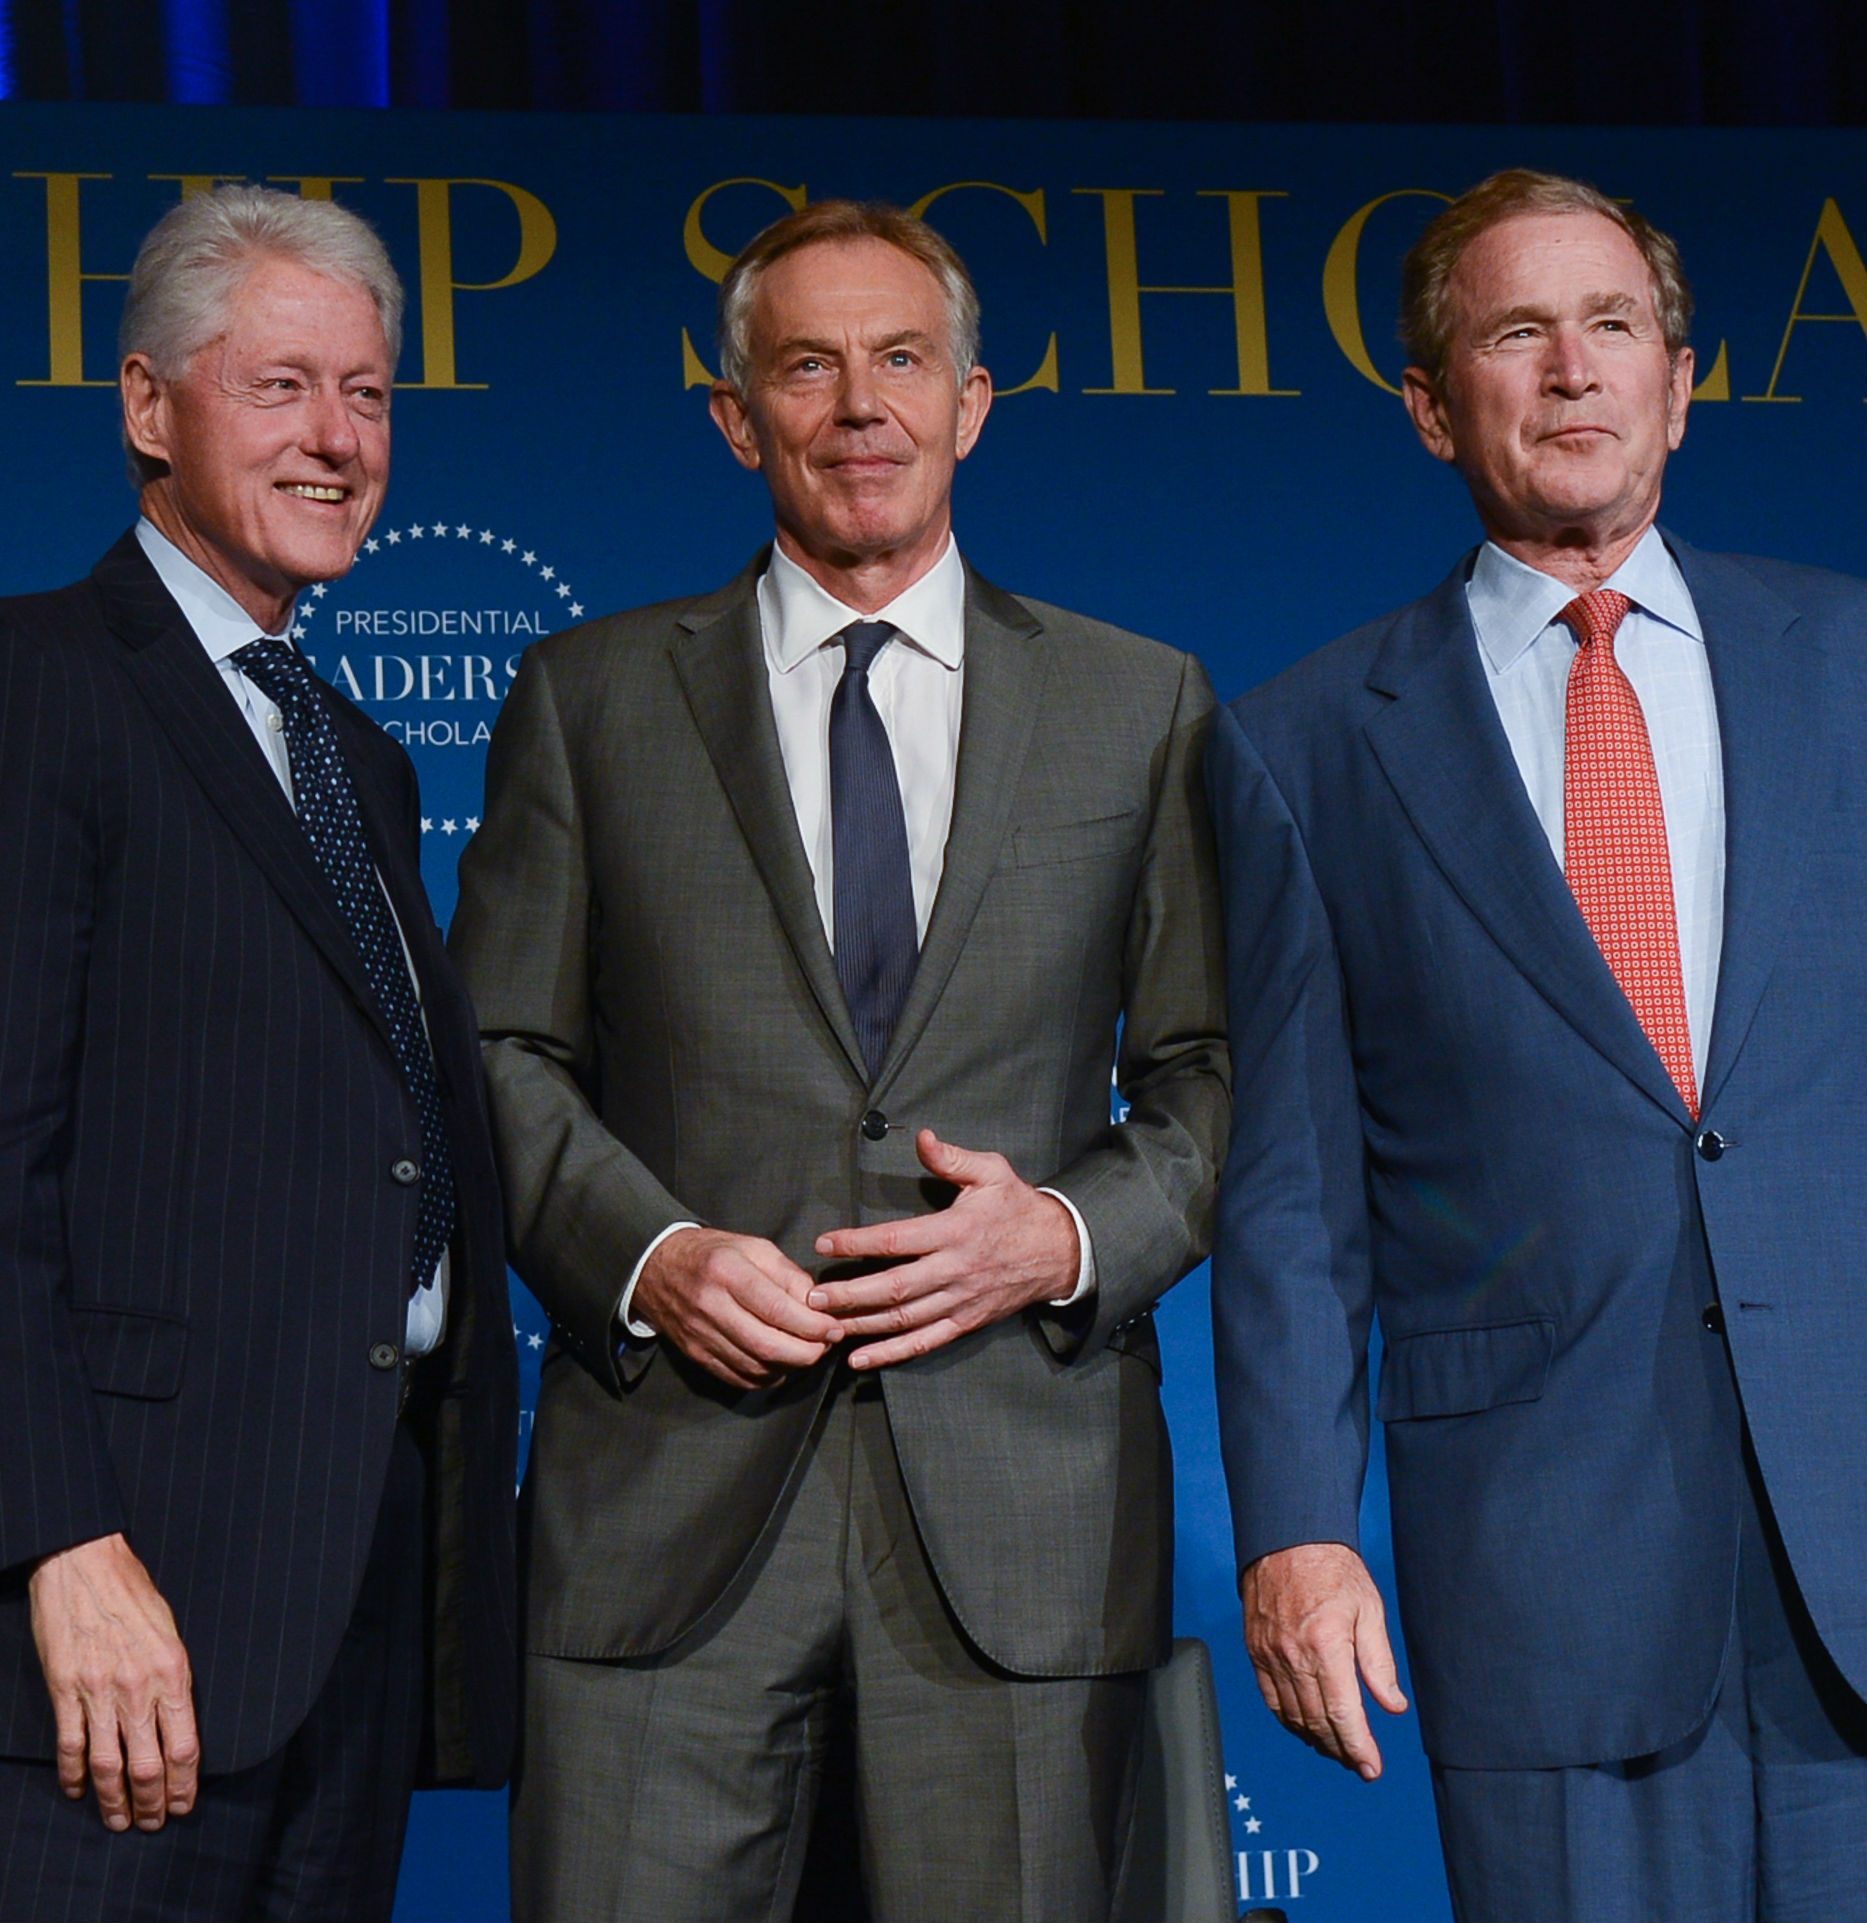 President Bill Clinton, Prime Minister Tony Blair, and President George W. Bush at Little Rock Central High School, July 14, 2016. (Grant Miller/George W. Bush Presidential Center)